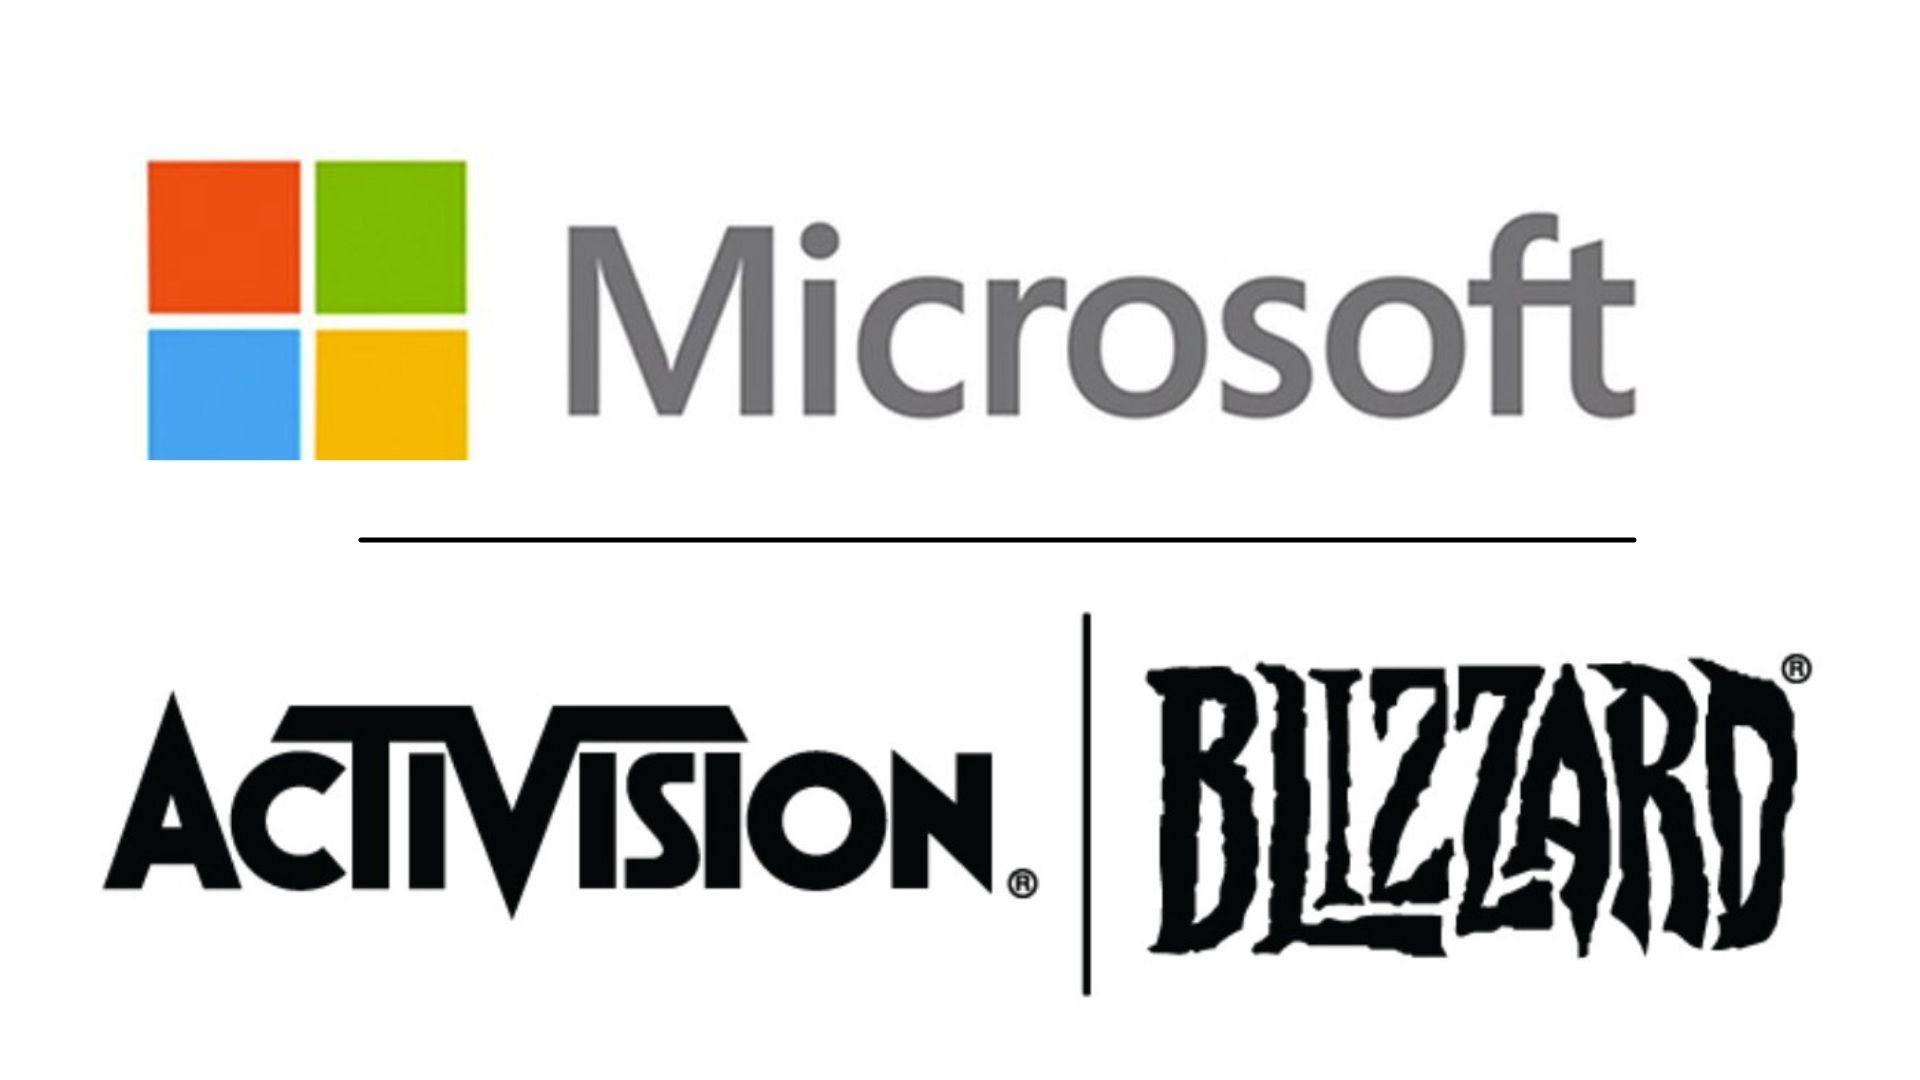 Activision Blizzard Will Be Acquired by Microsoft for $68.7 Billion in the Biggest Takeover Ever